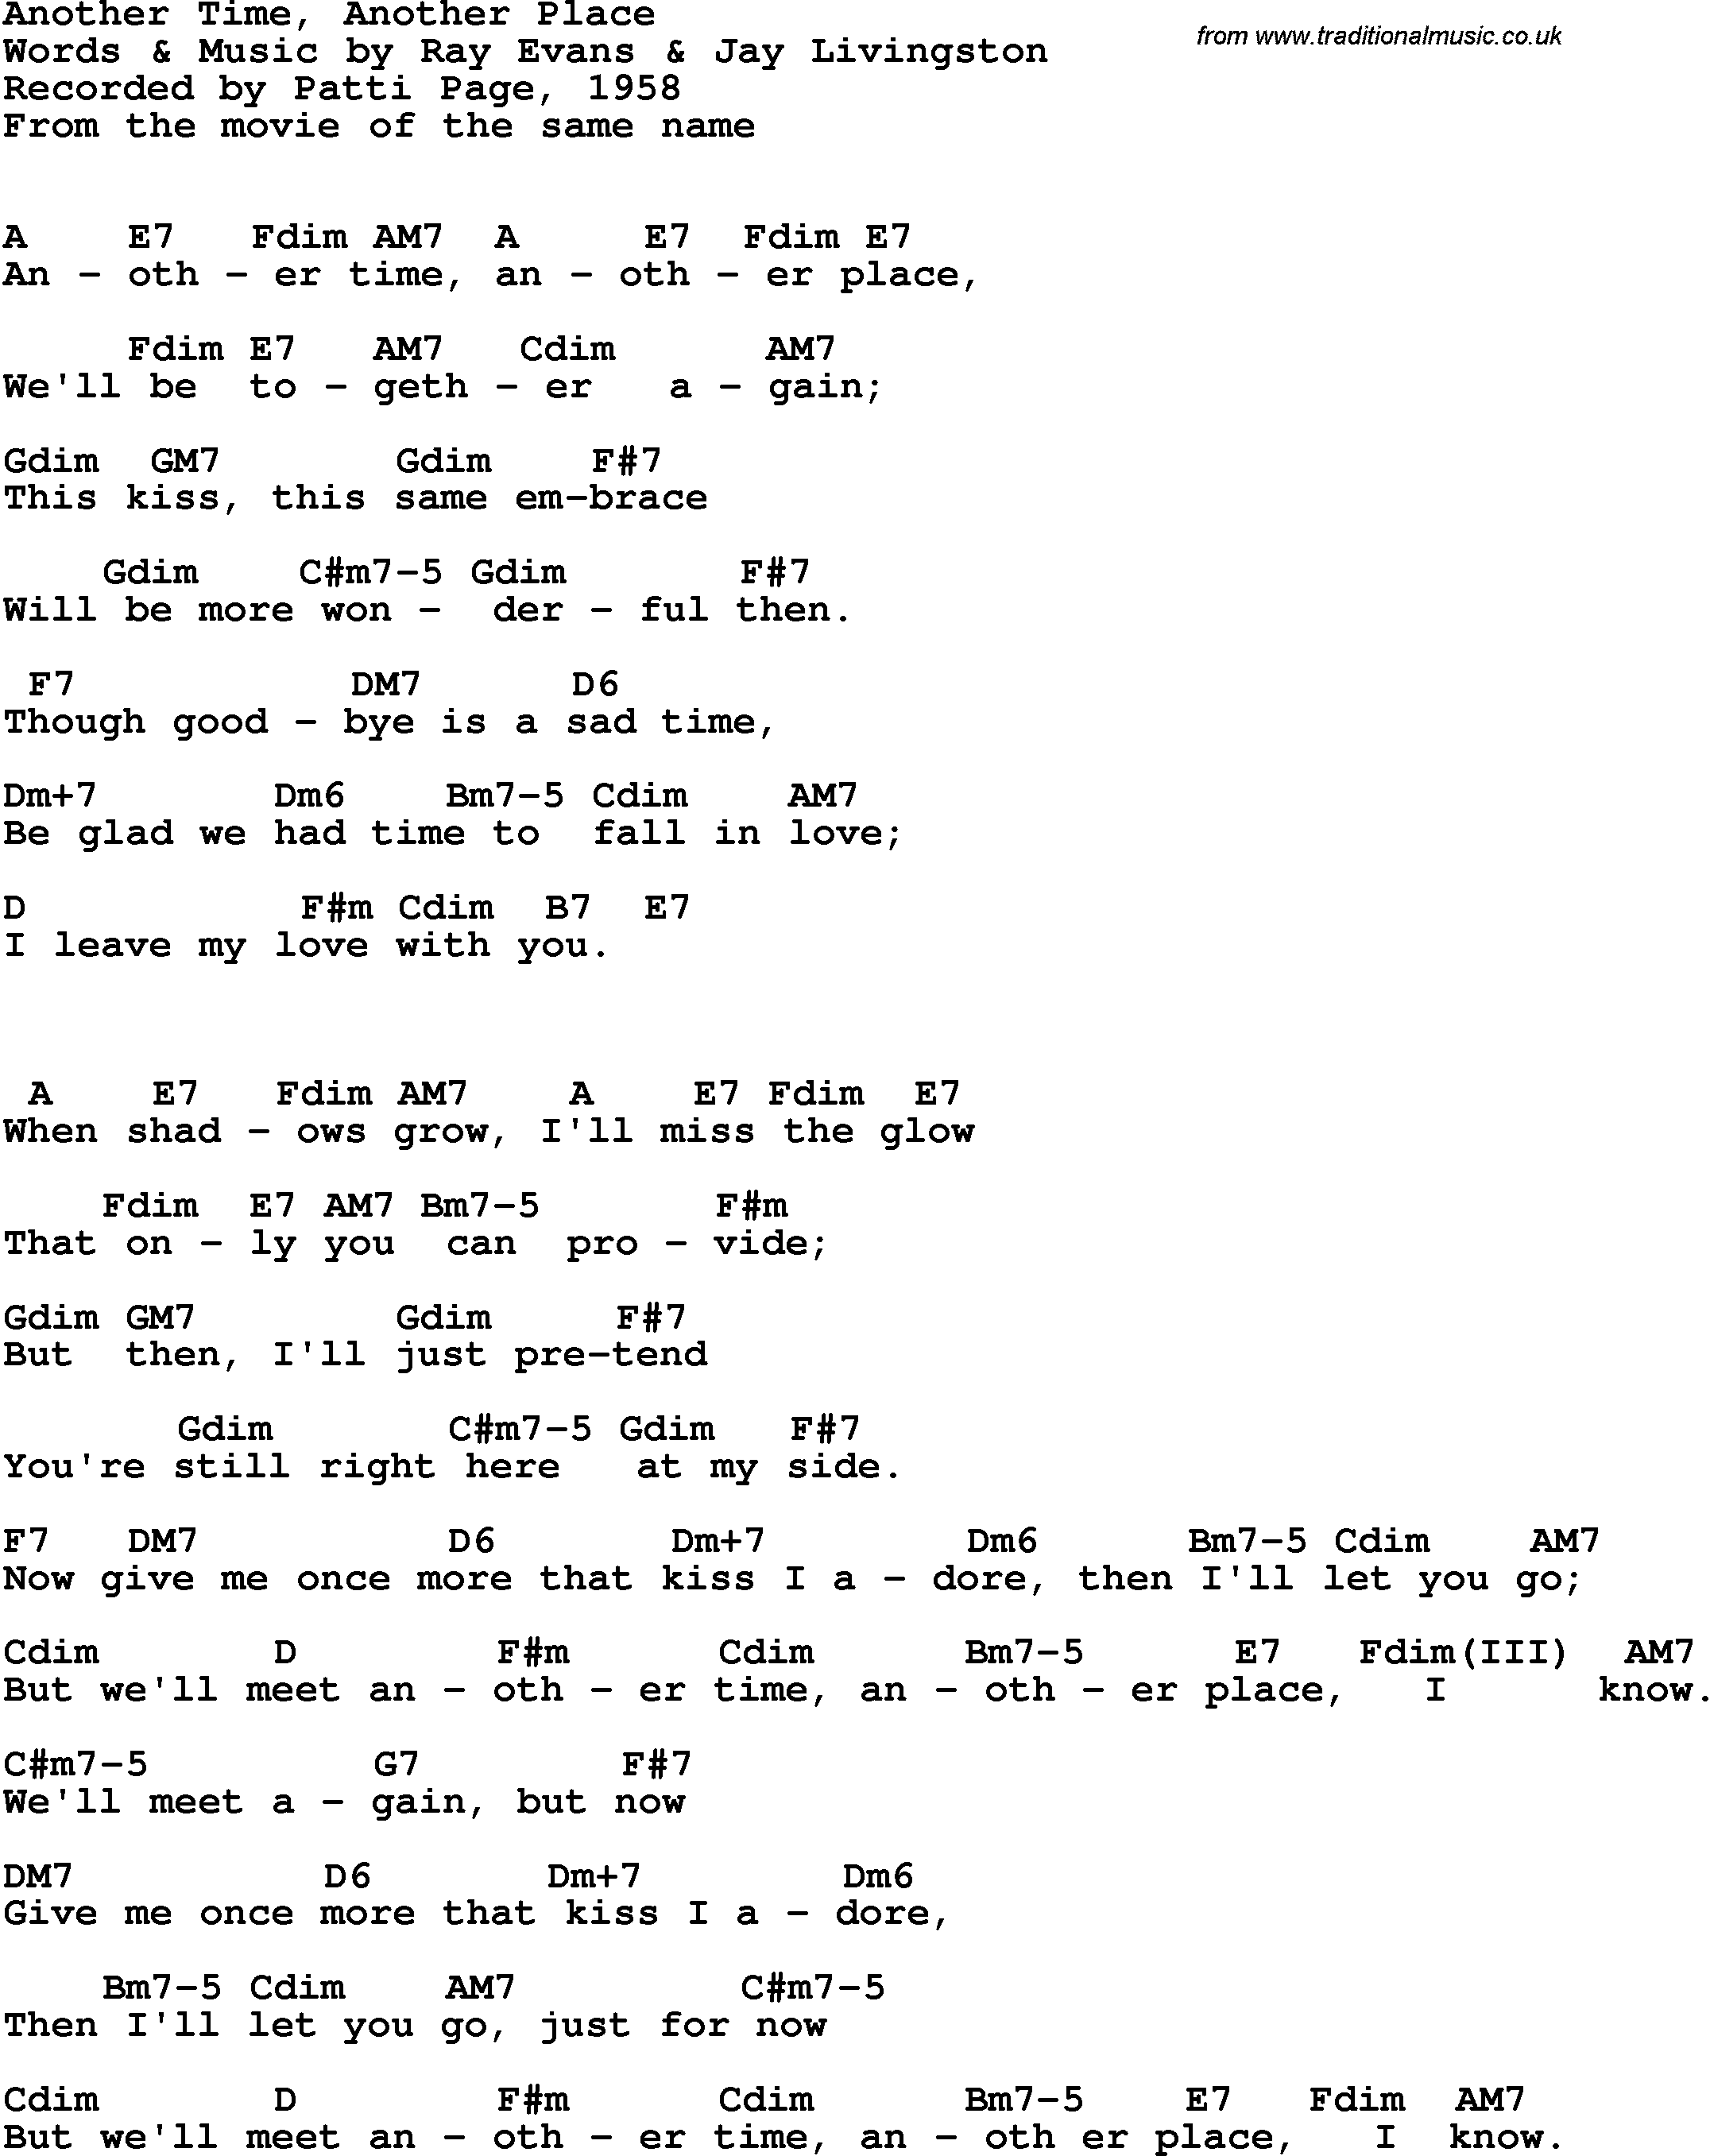 Song Lyrics with guitar chords for Another Time, Another Place - Patti Page, 1958